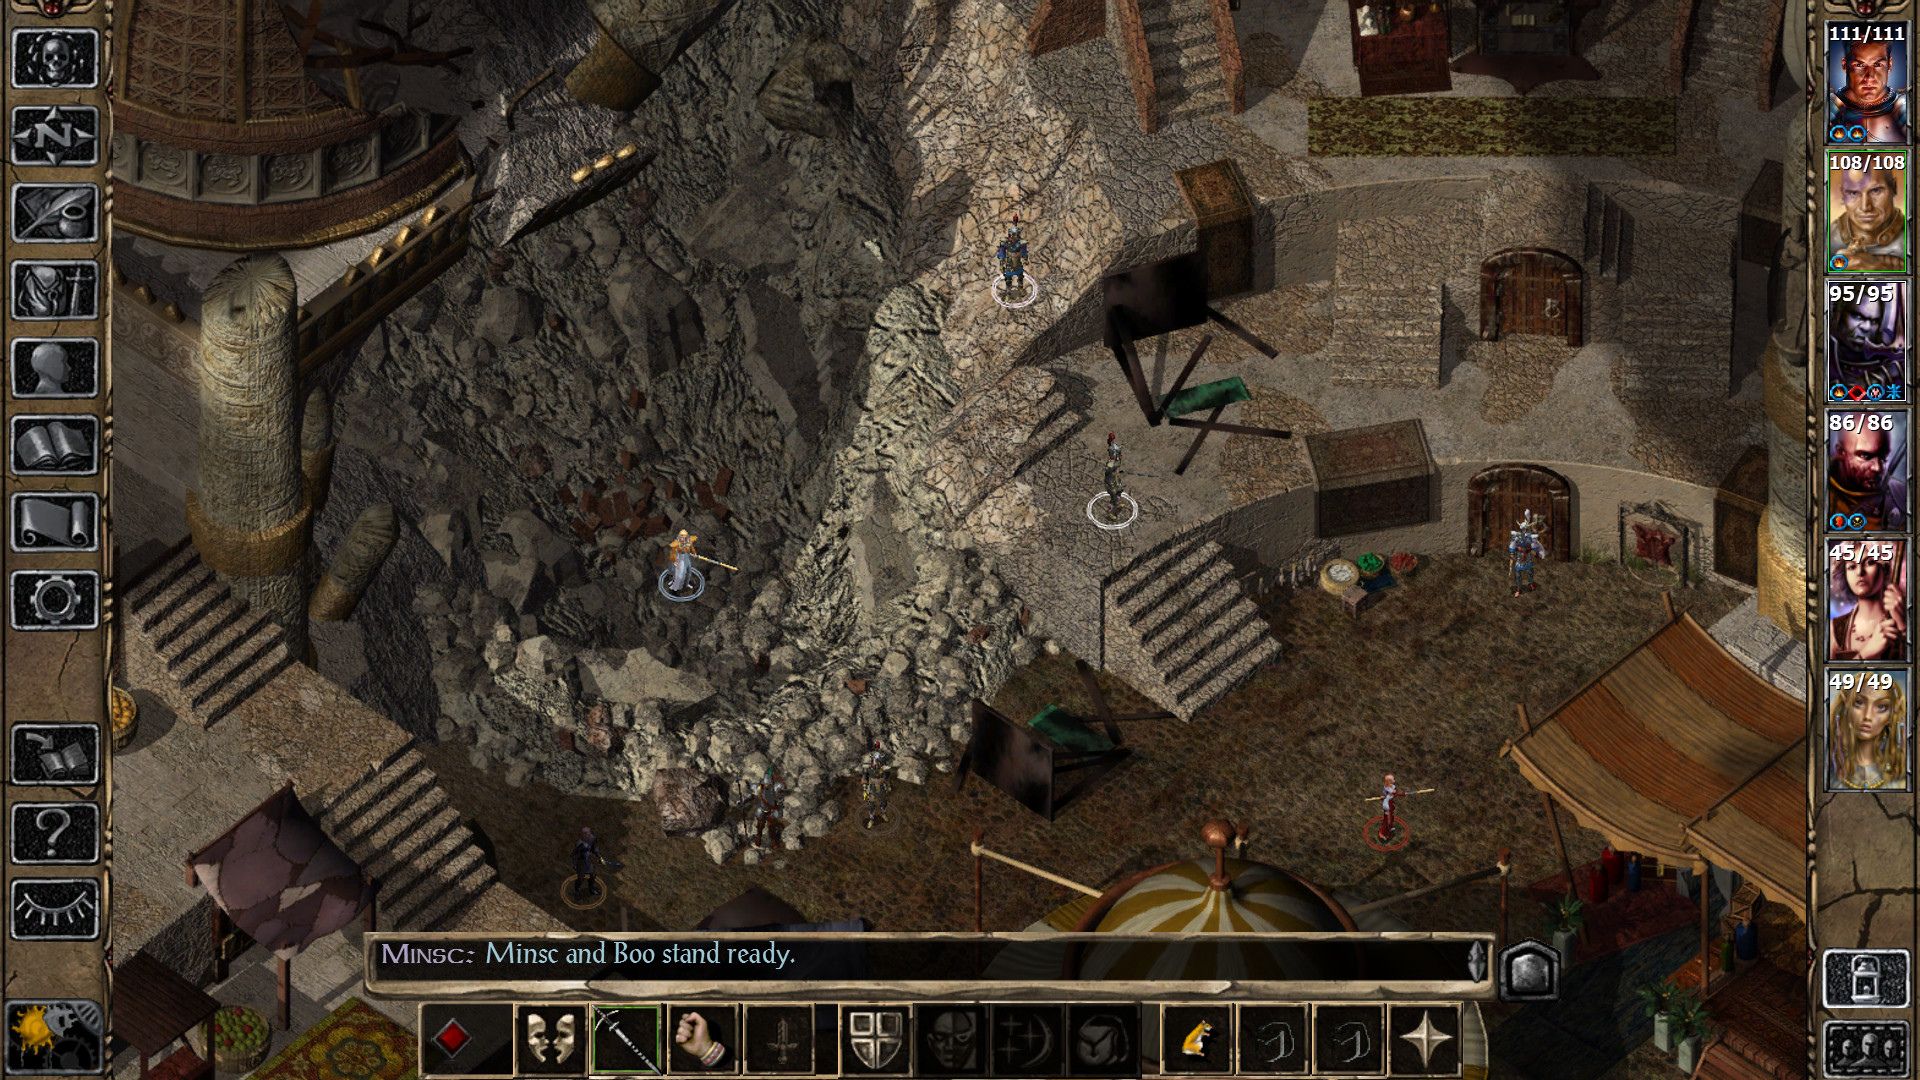 Baldur's Gate 1 & 2 is one of the best games that deserves an HD remaster. 